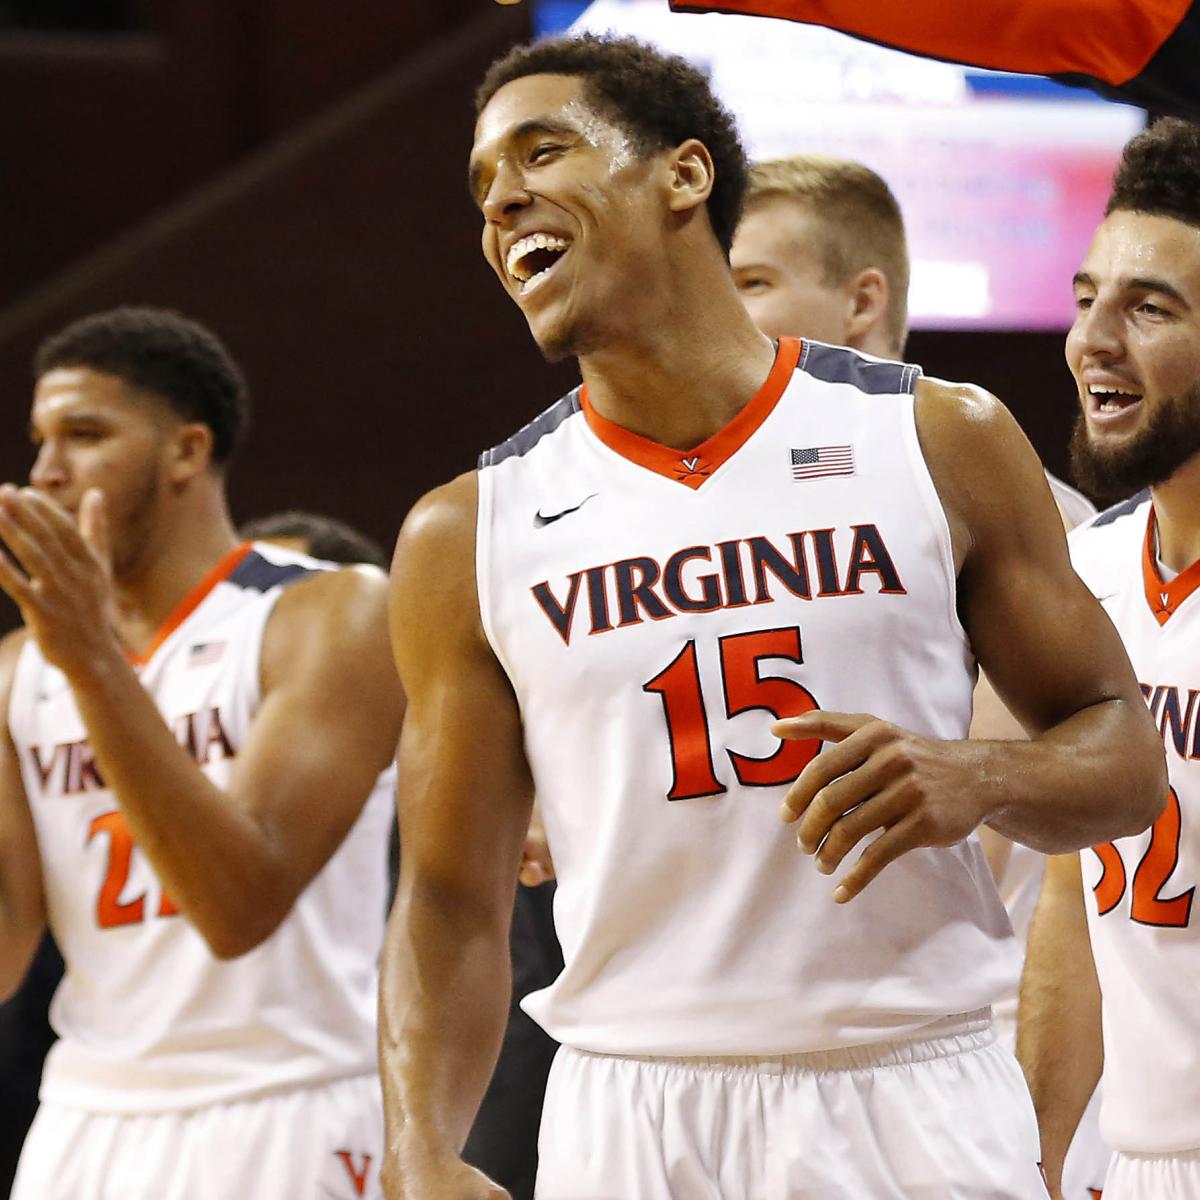 Virginia's Brogdon: Lost year was a 'blessing' in disguise